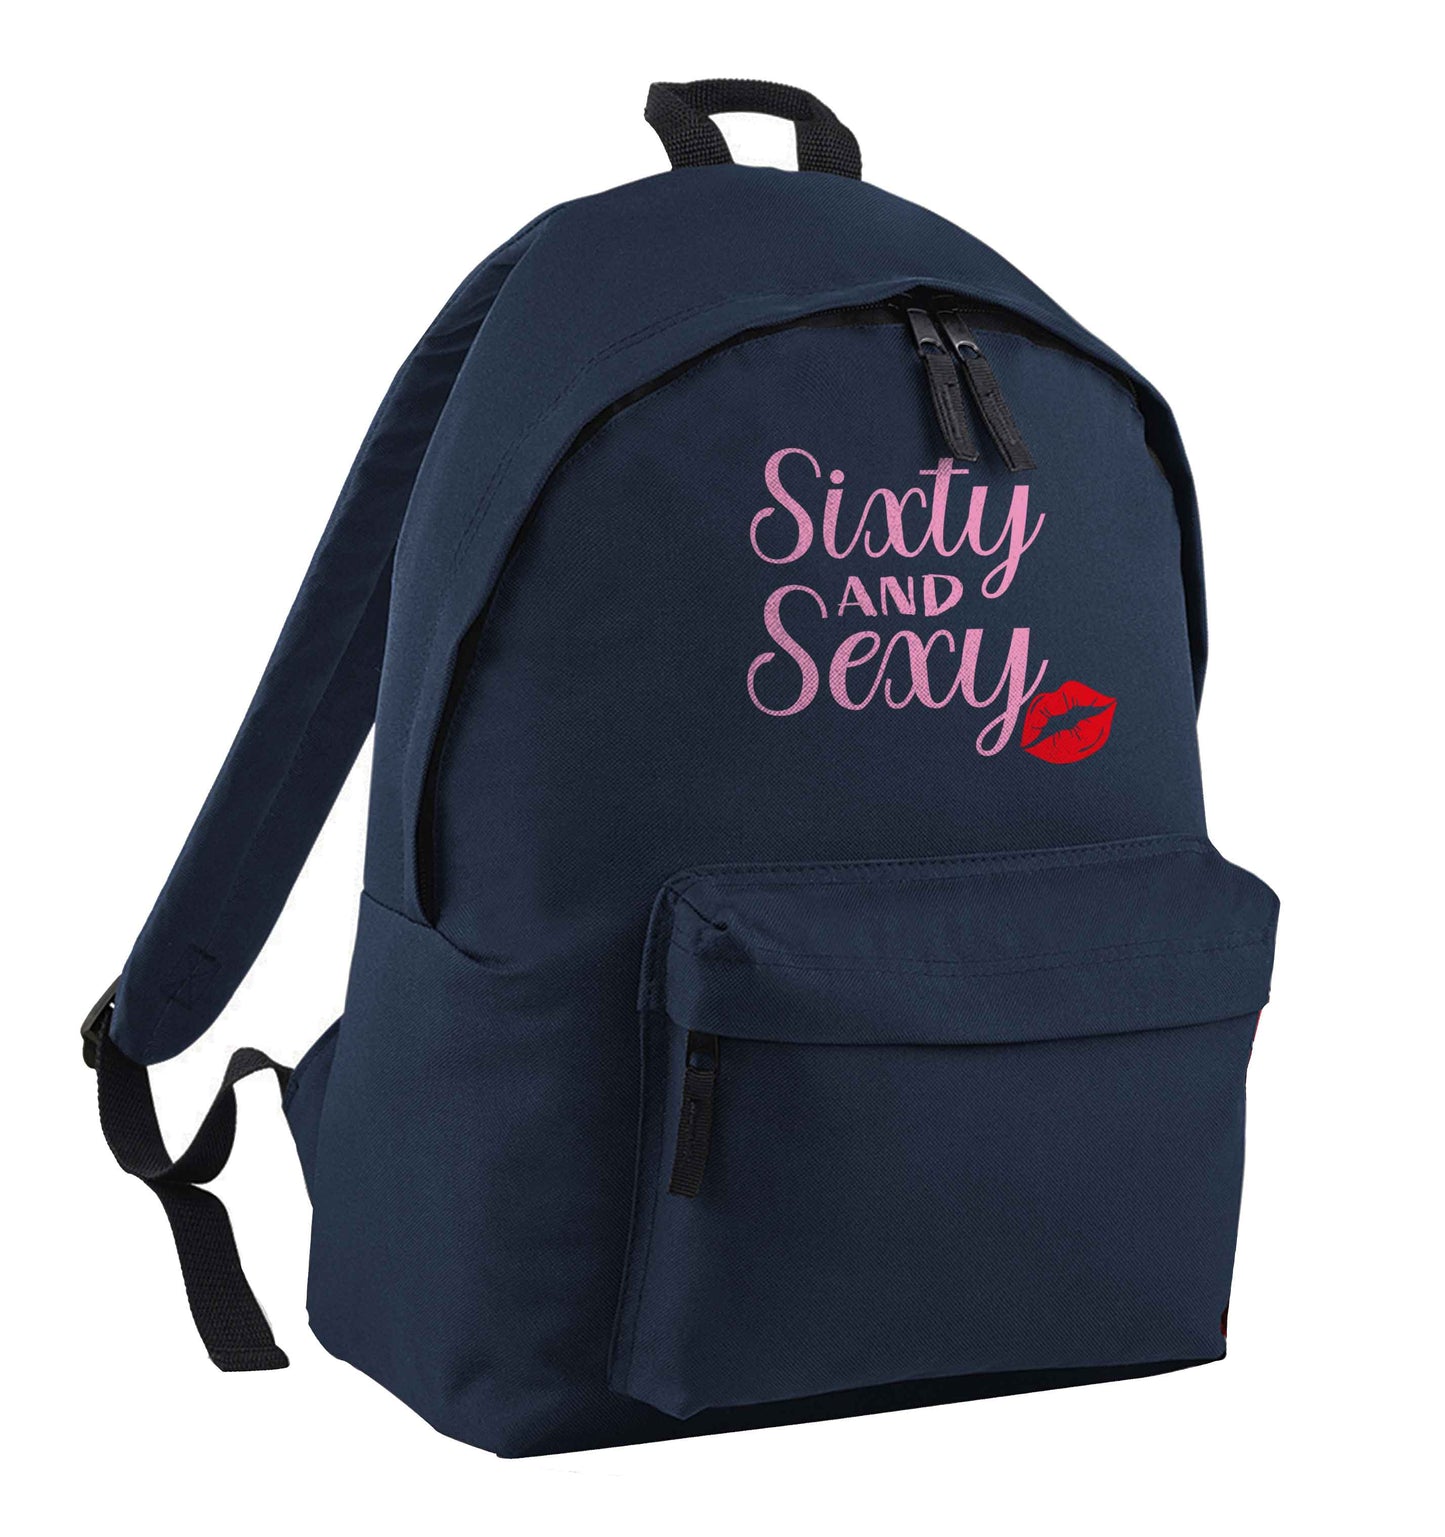 Sixty and sexy navy adults backpack